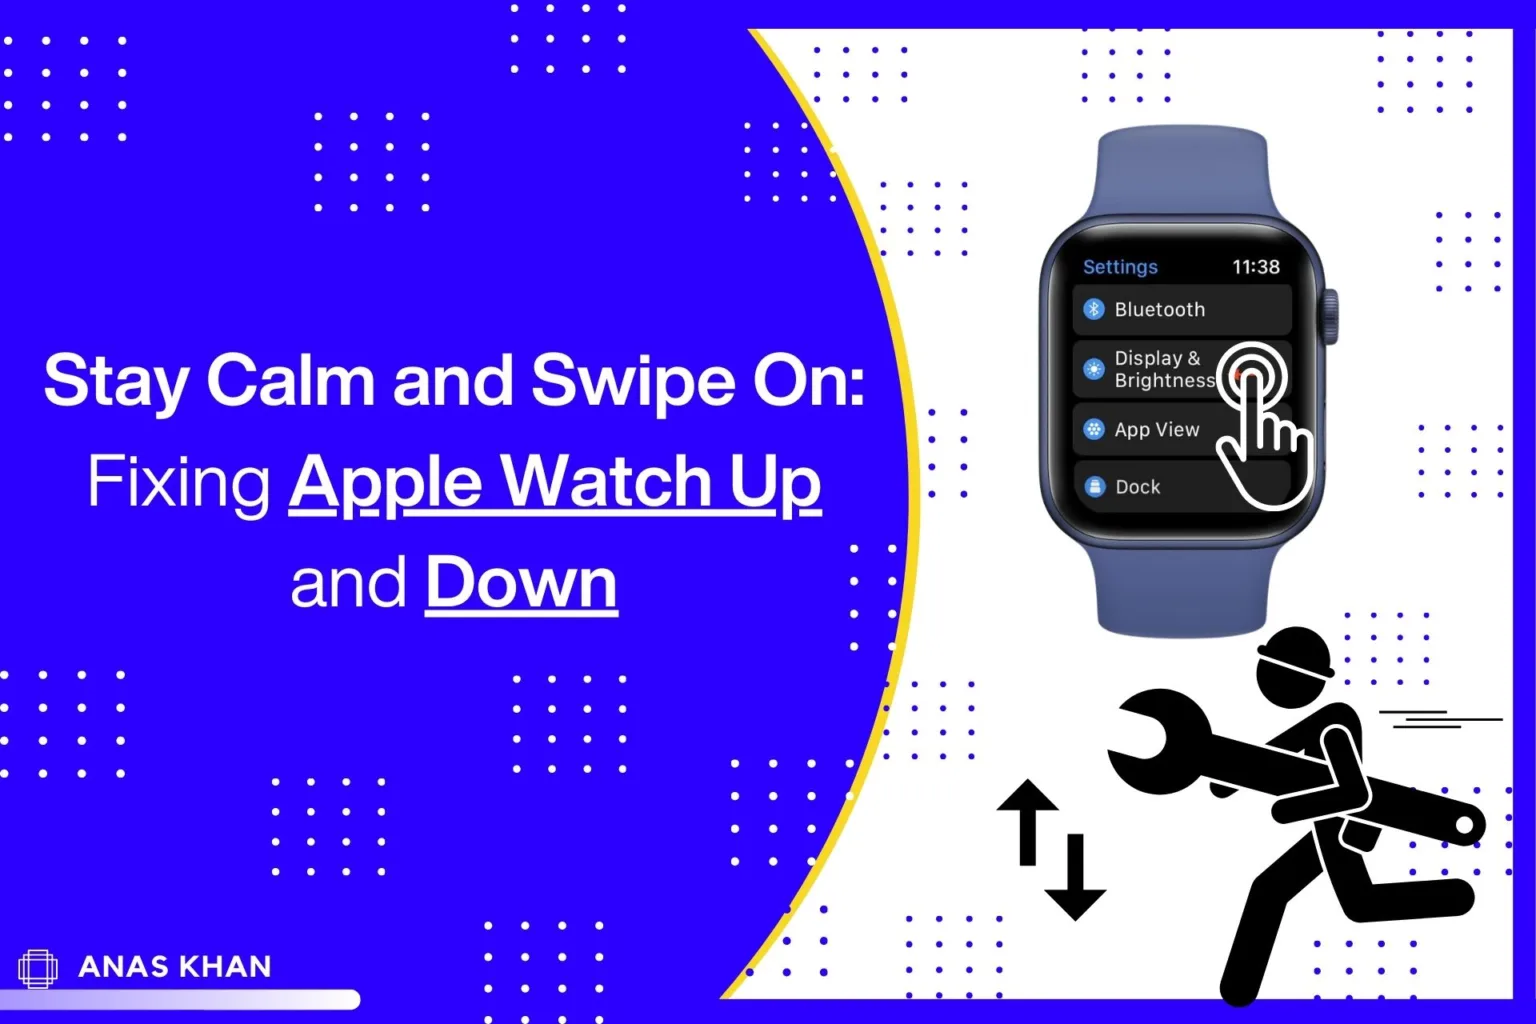 Stay Calm and Swipe On: Fixing Apple Watch Up and Down